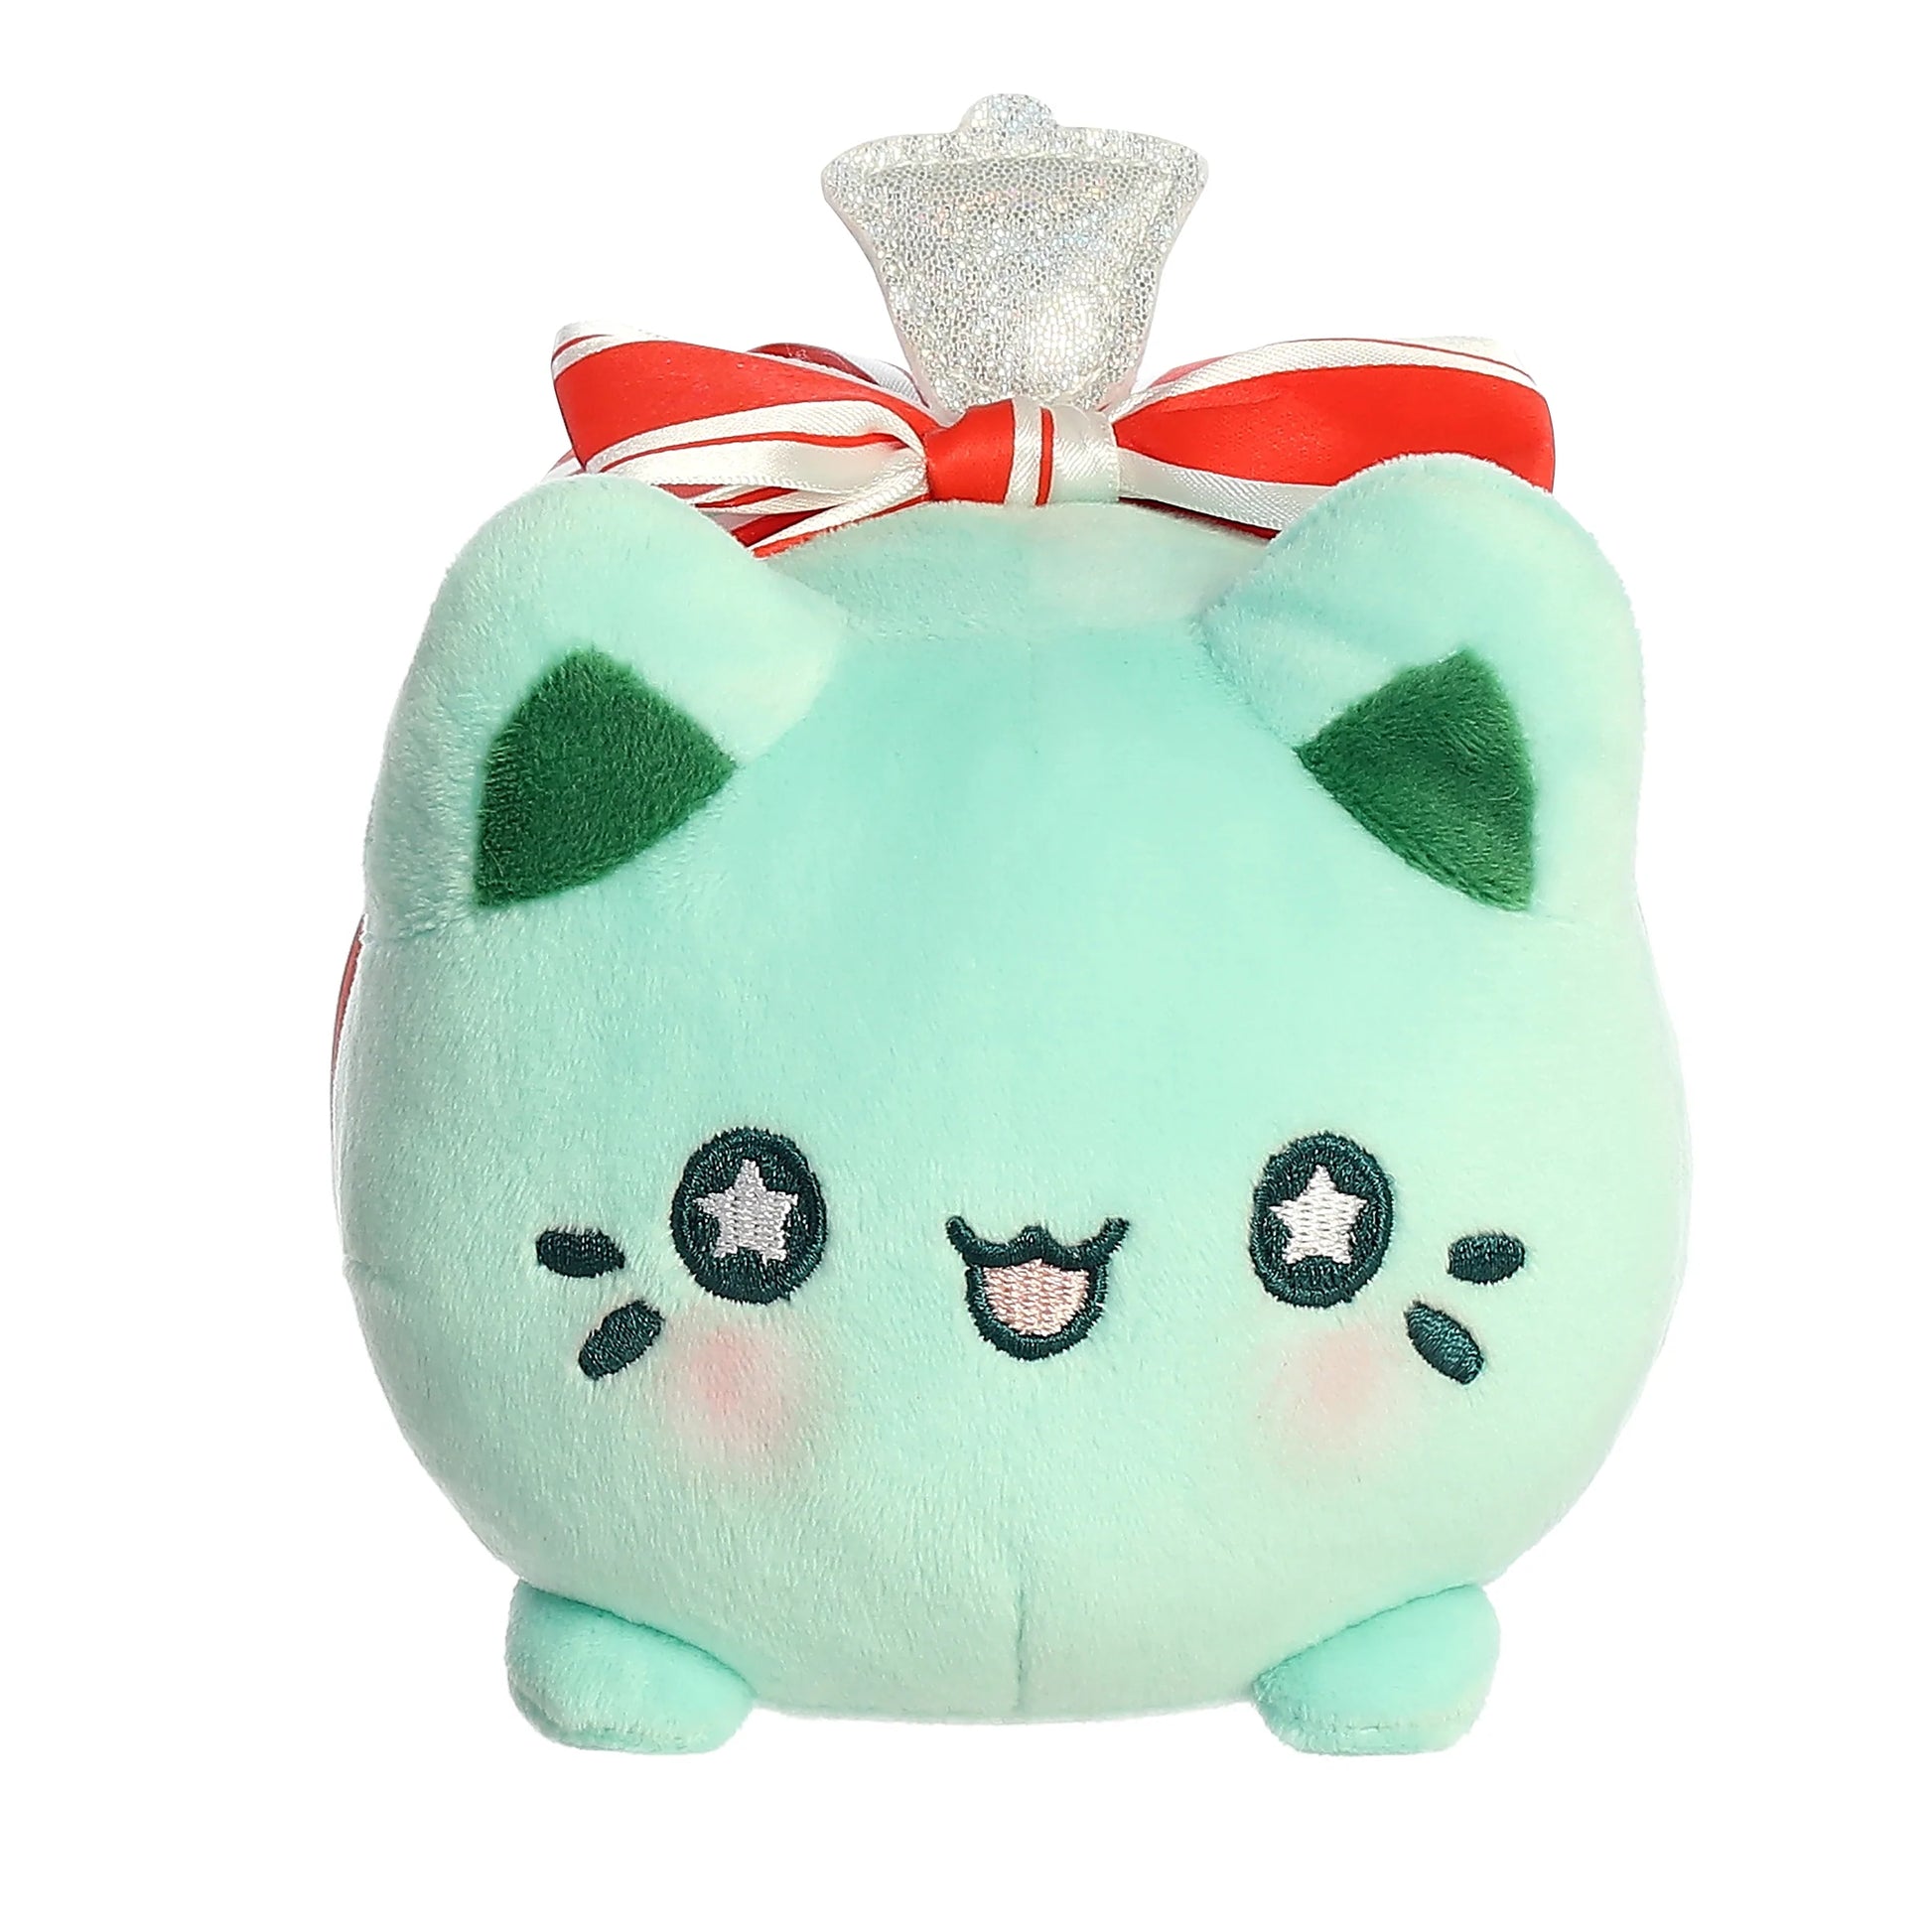 A new Tasty Peach holiday addition, Winter Wreath Meowchi will make your holidays more jolly! Winter Wreath Meowchi is overstuffed and ready for the holidays with minty green colors, star embroidered eyes, and a nicely tied peppermint bow